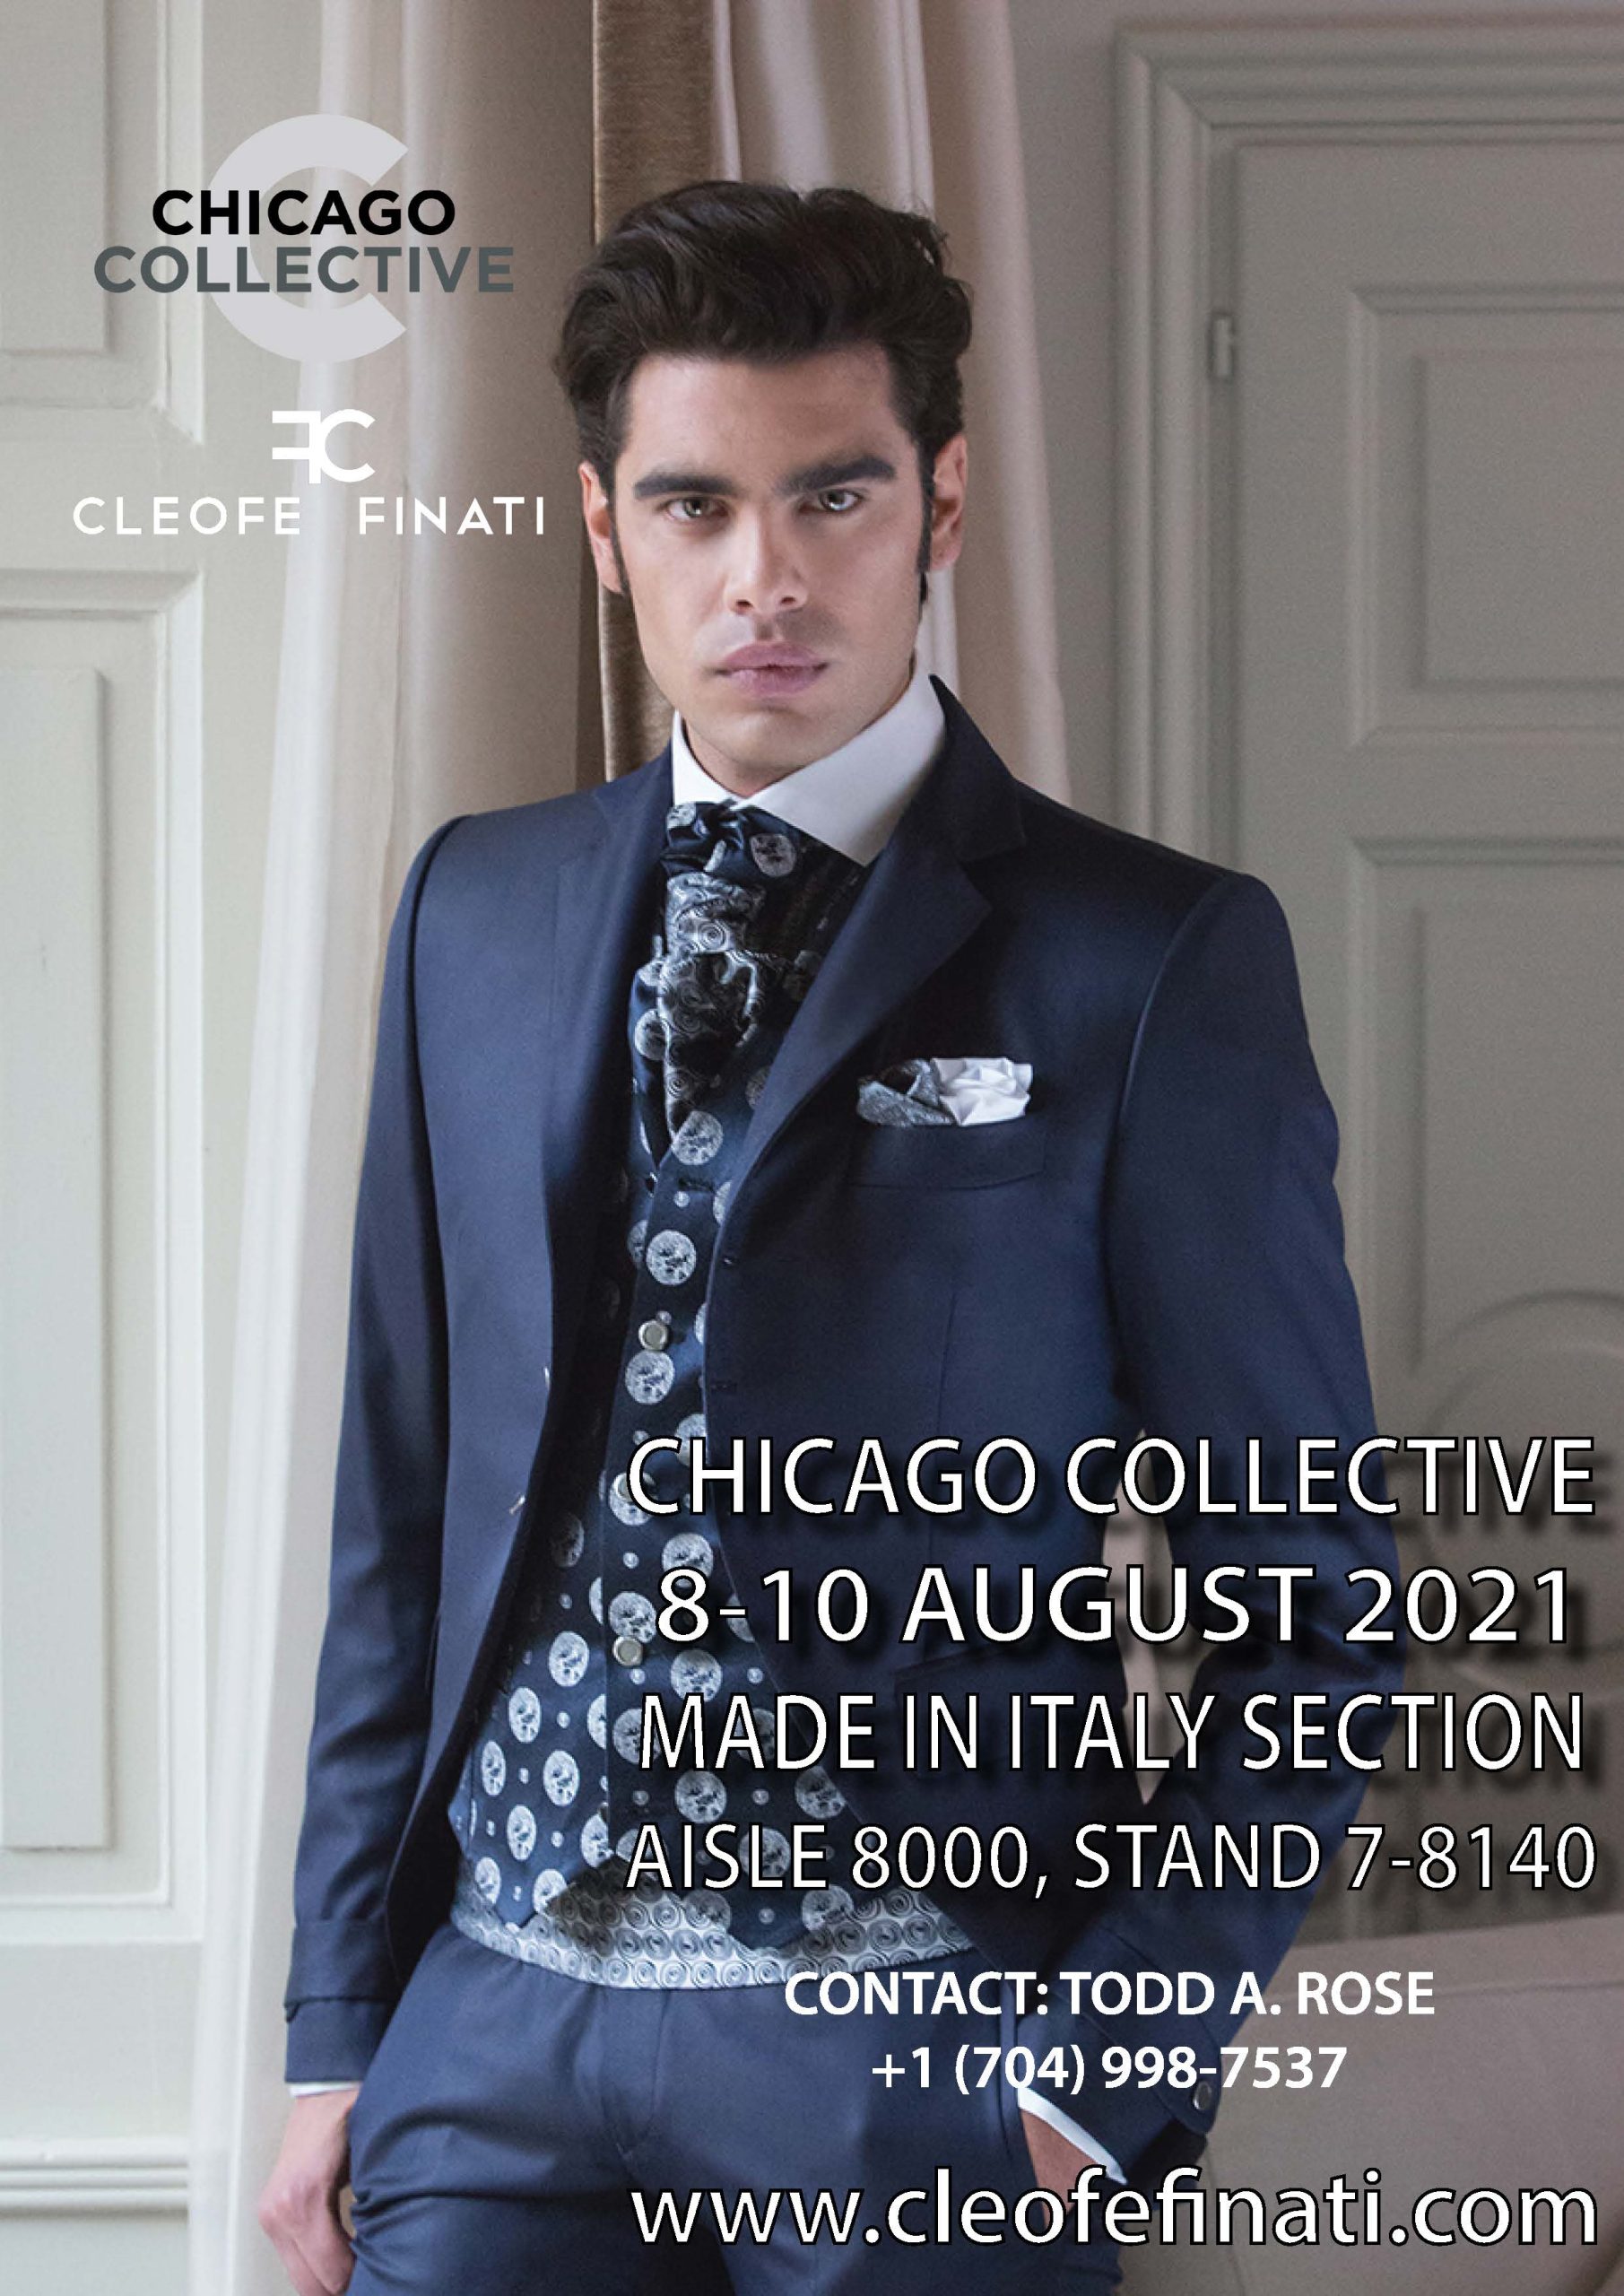 CHICAGO COLLECTIVE 810 AUGUST 2021 NEWS Cleofe Finati